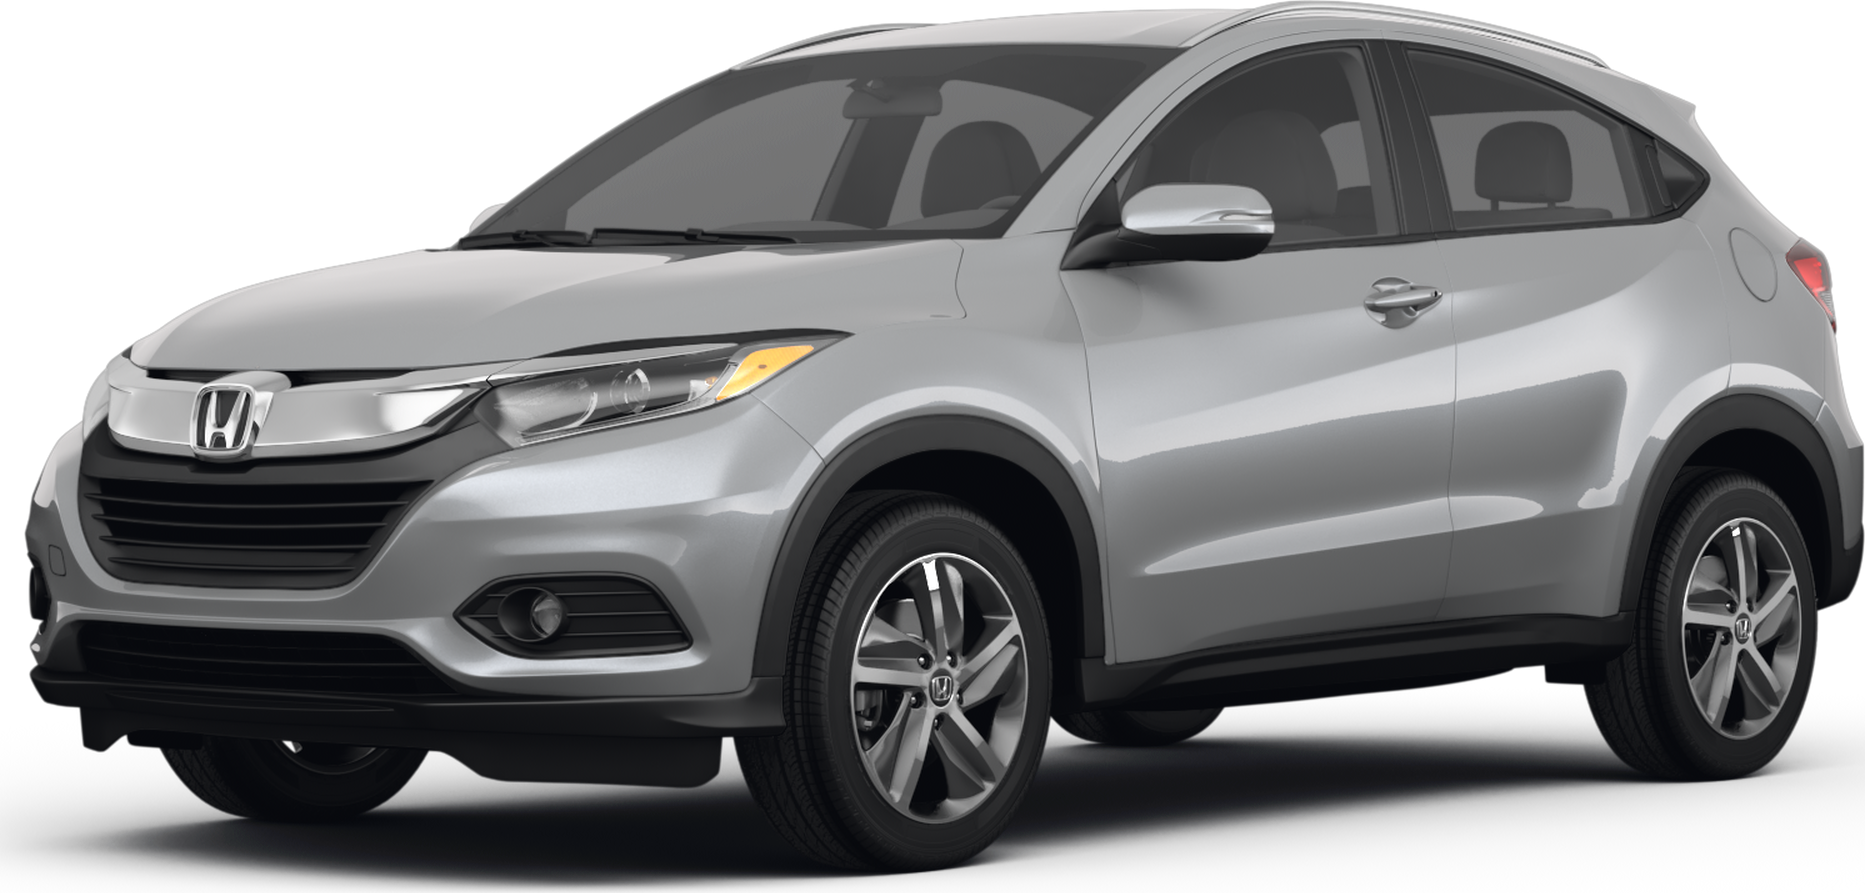 2022 Honda HR-V Detailed With Two Powertrain Options Down Under